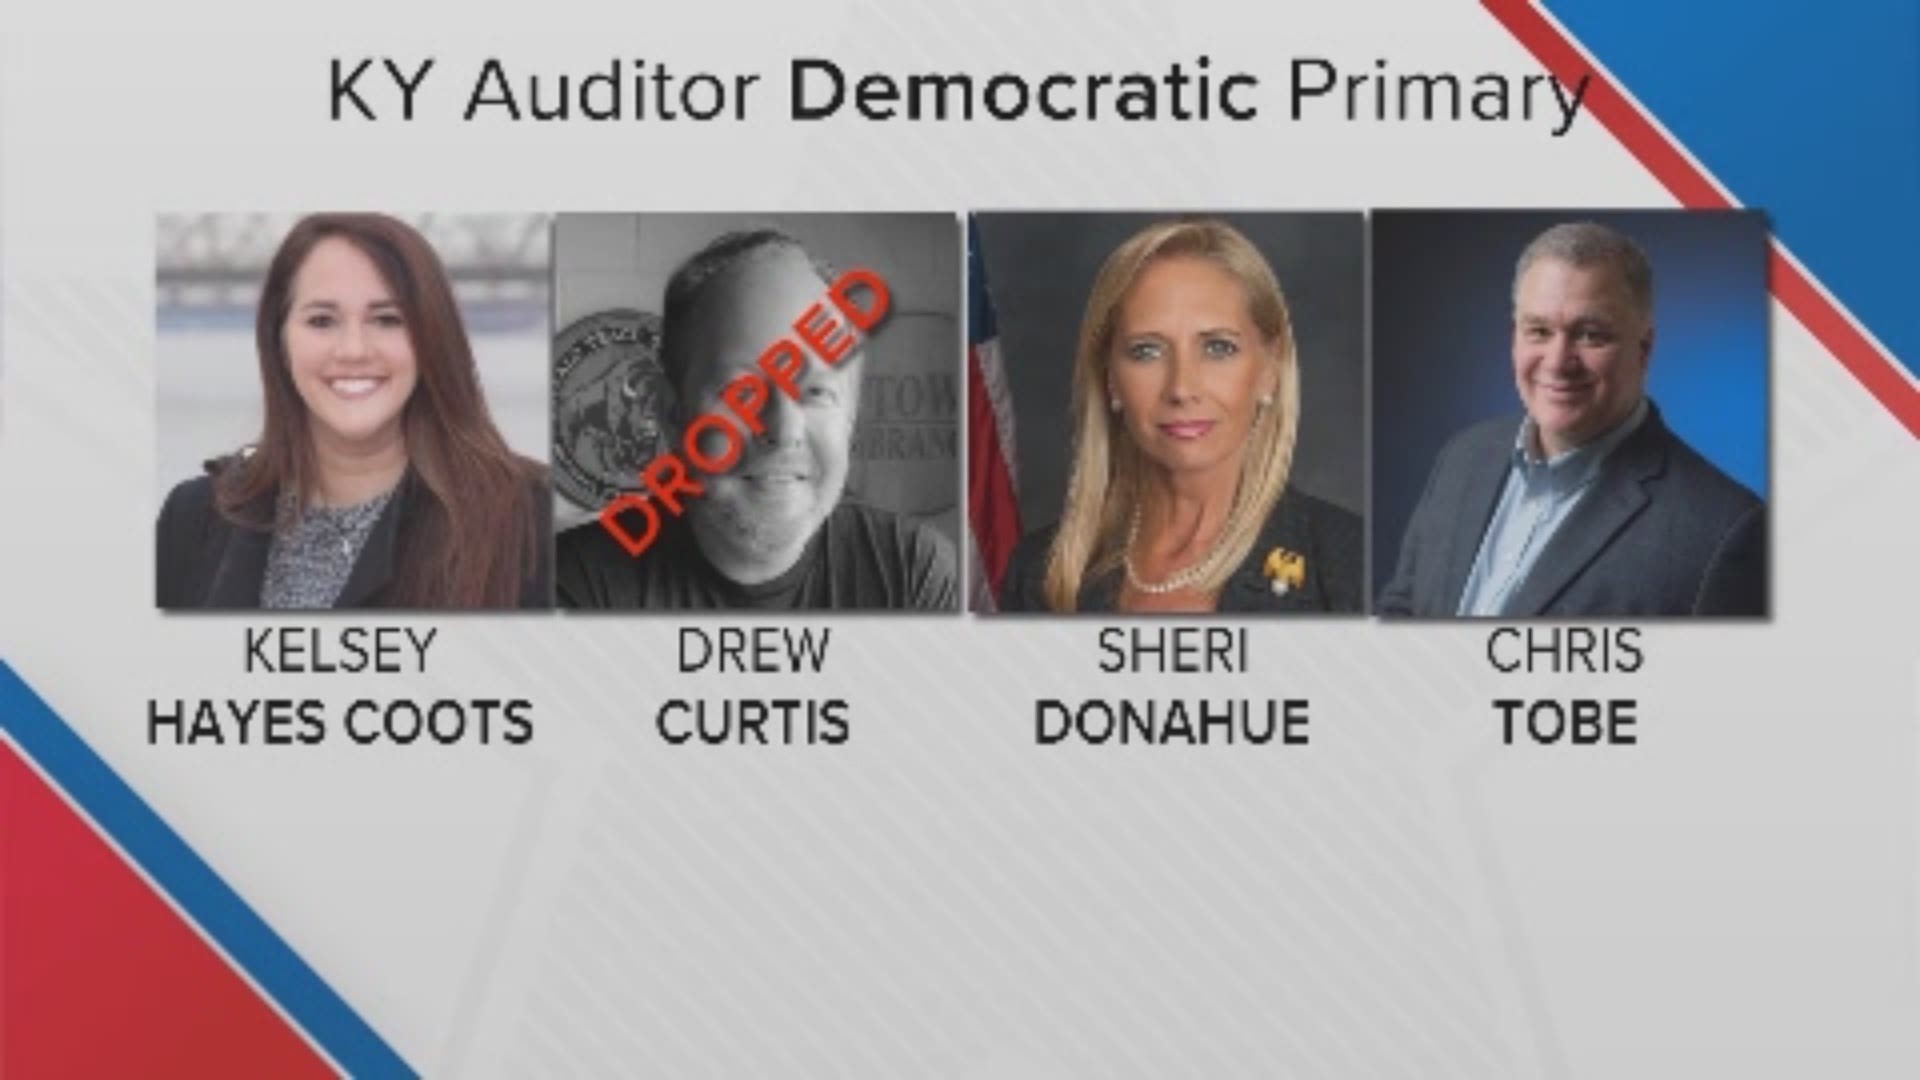 Three Democrats are on the ballot next week hoping to win their party's primary and take on State Auditor Mike Harmon.